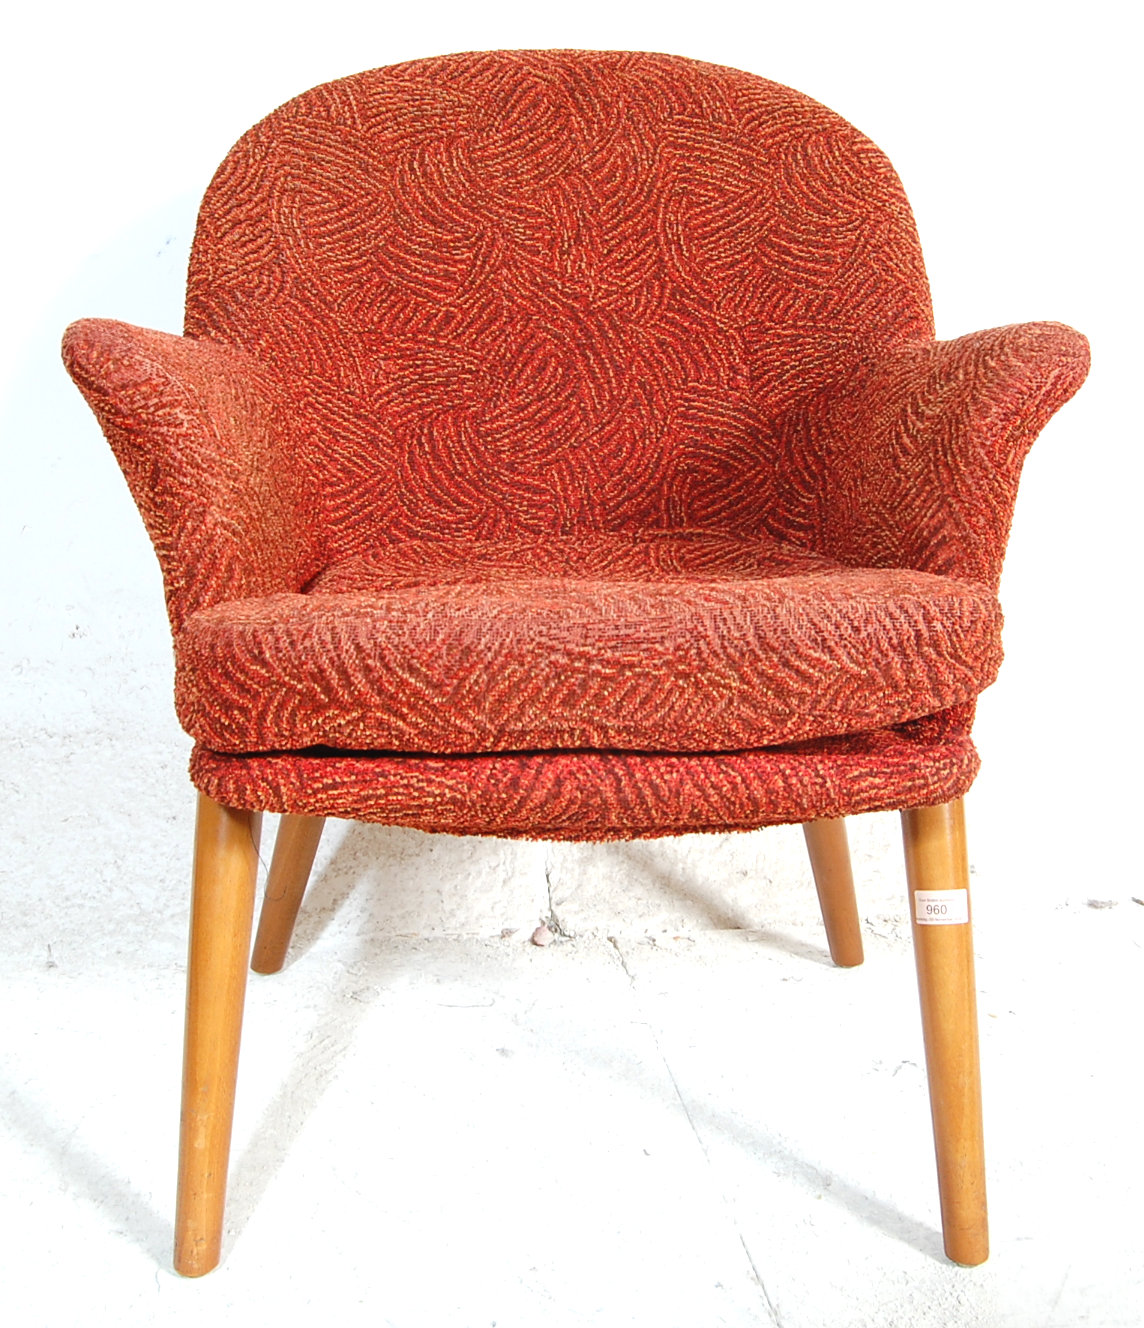 VINTAGE 20TH CENTURY TUB CHAIR WITH RED UPHOLSTERY AND TURNED SUPPORTS - Image 2 of 4